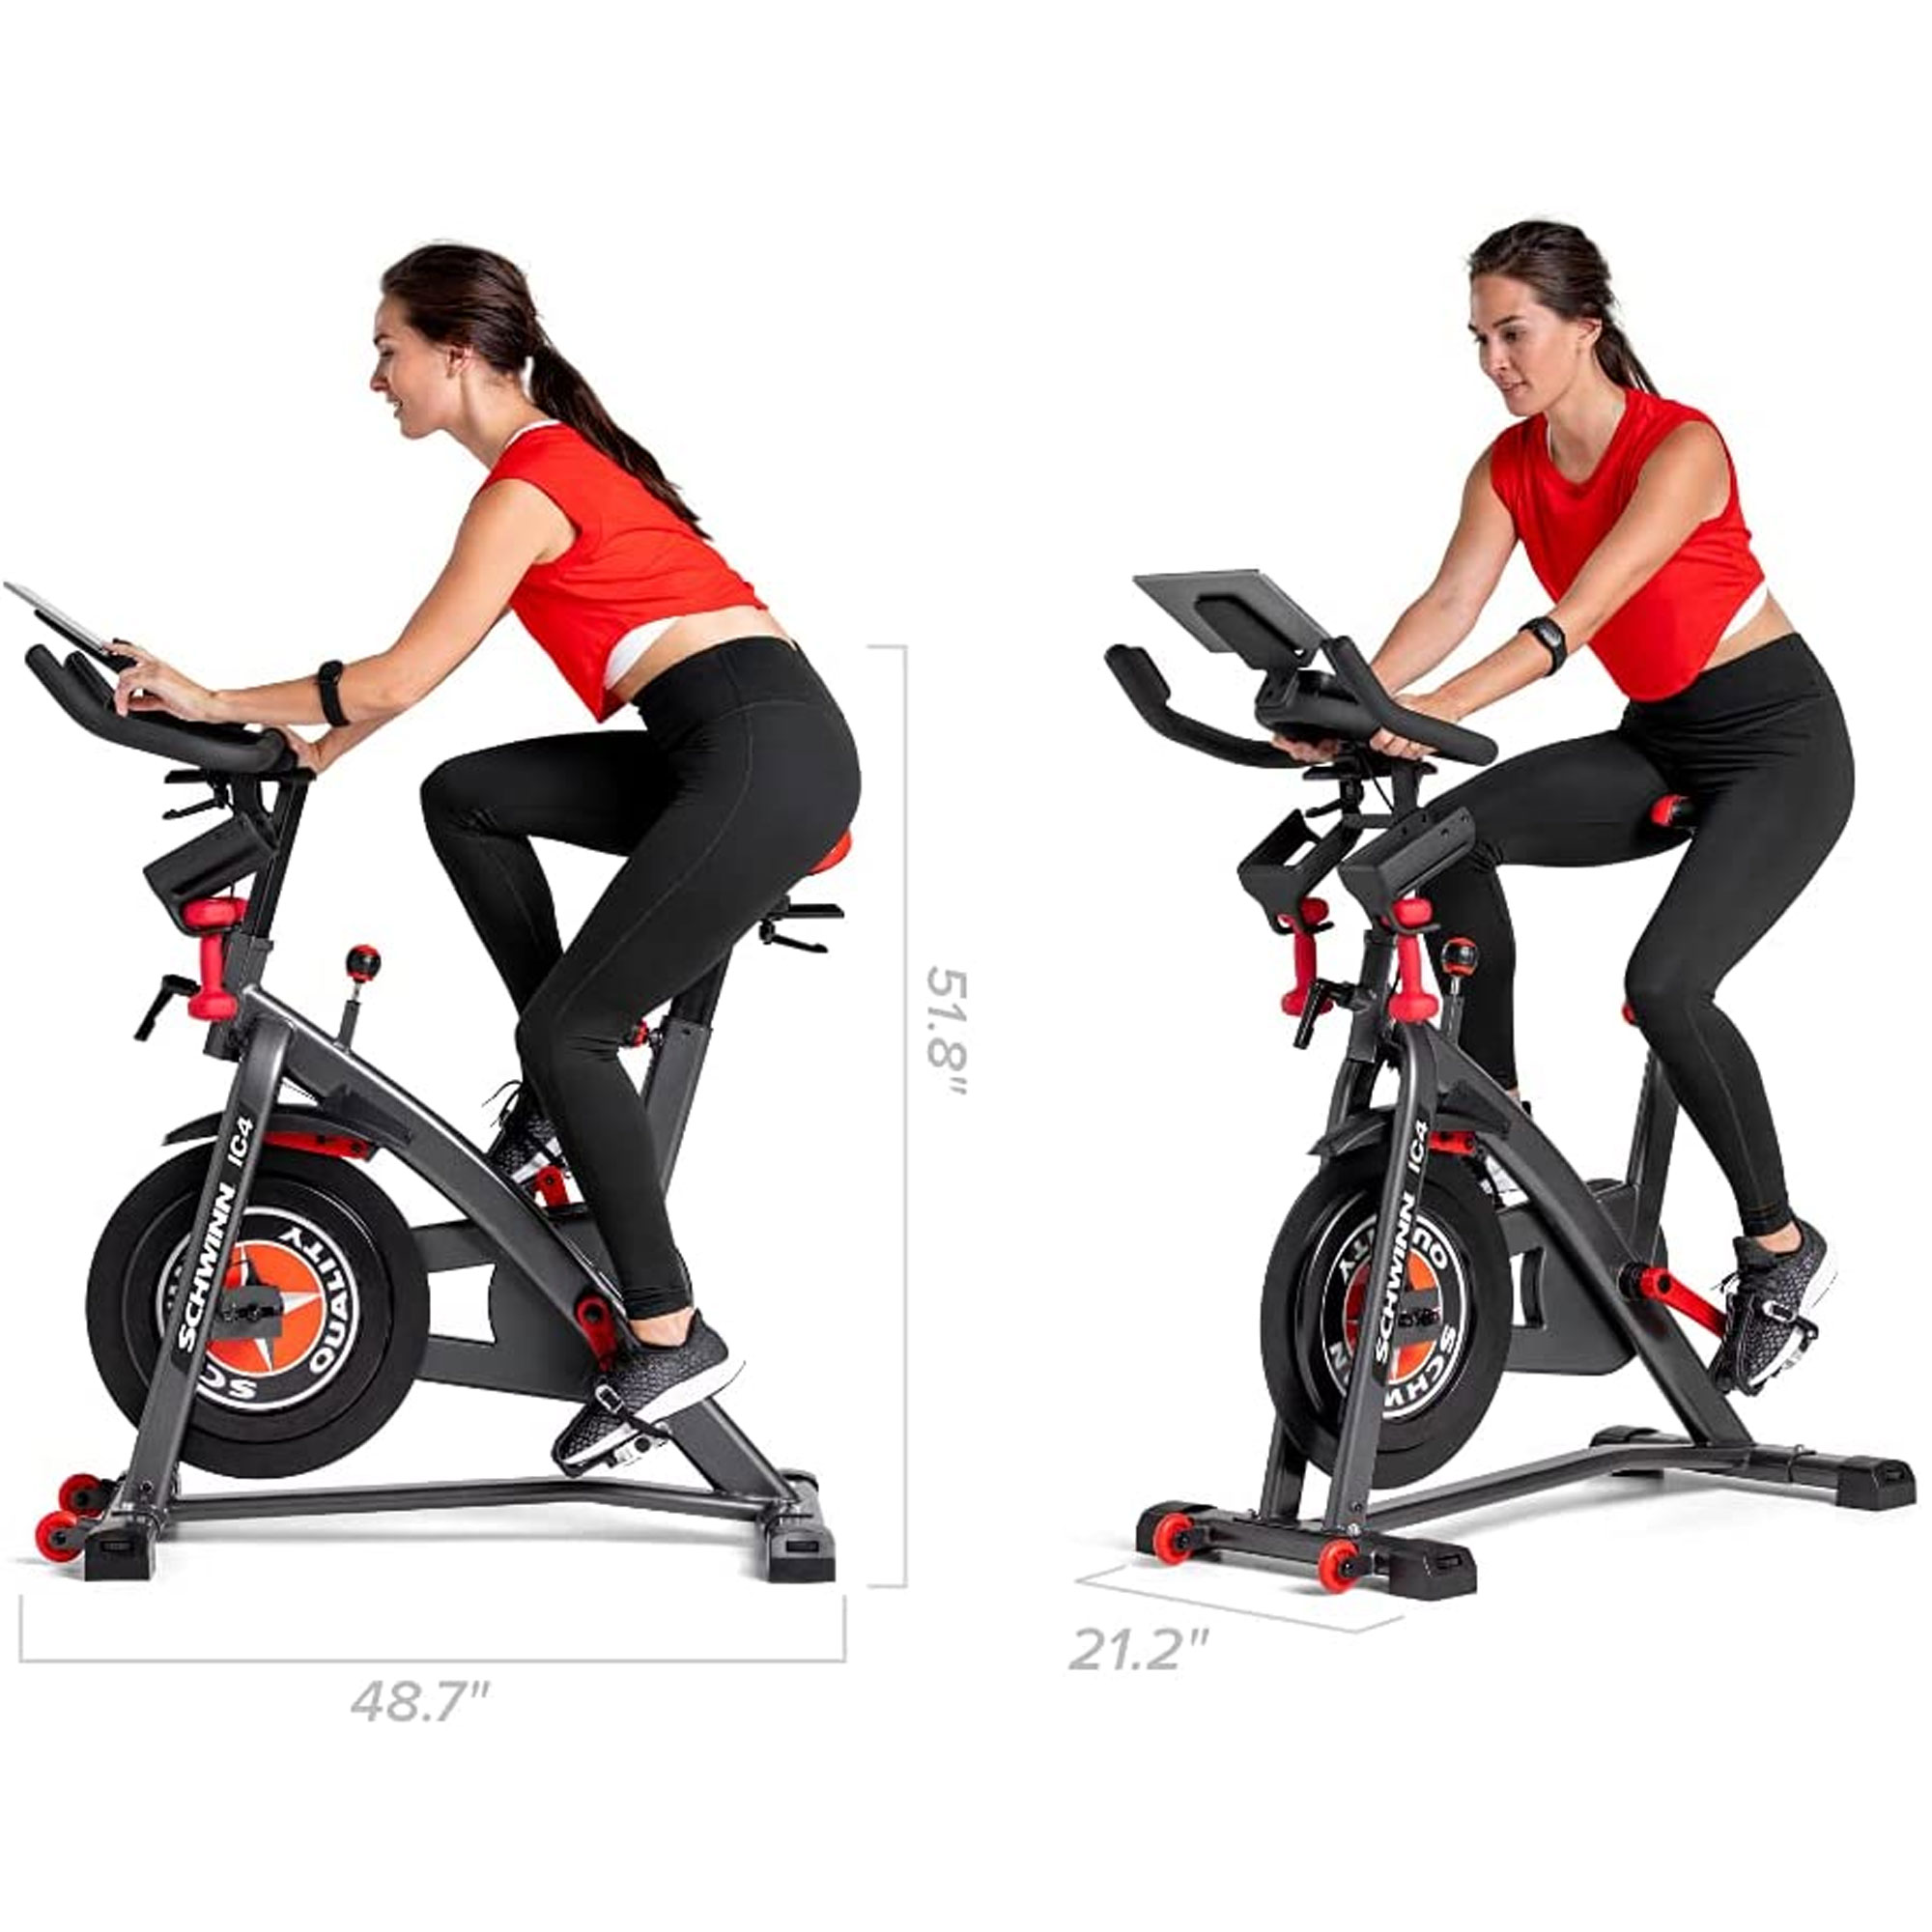 Schwinn Fitness IC4 Indoor Stationary Exercise Cycling Training Bike, Free 2-Month JRNY Membership - image 13 of 14